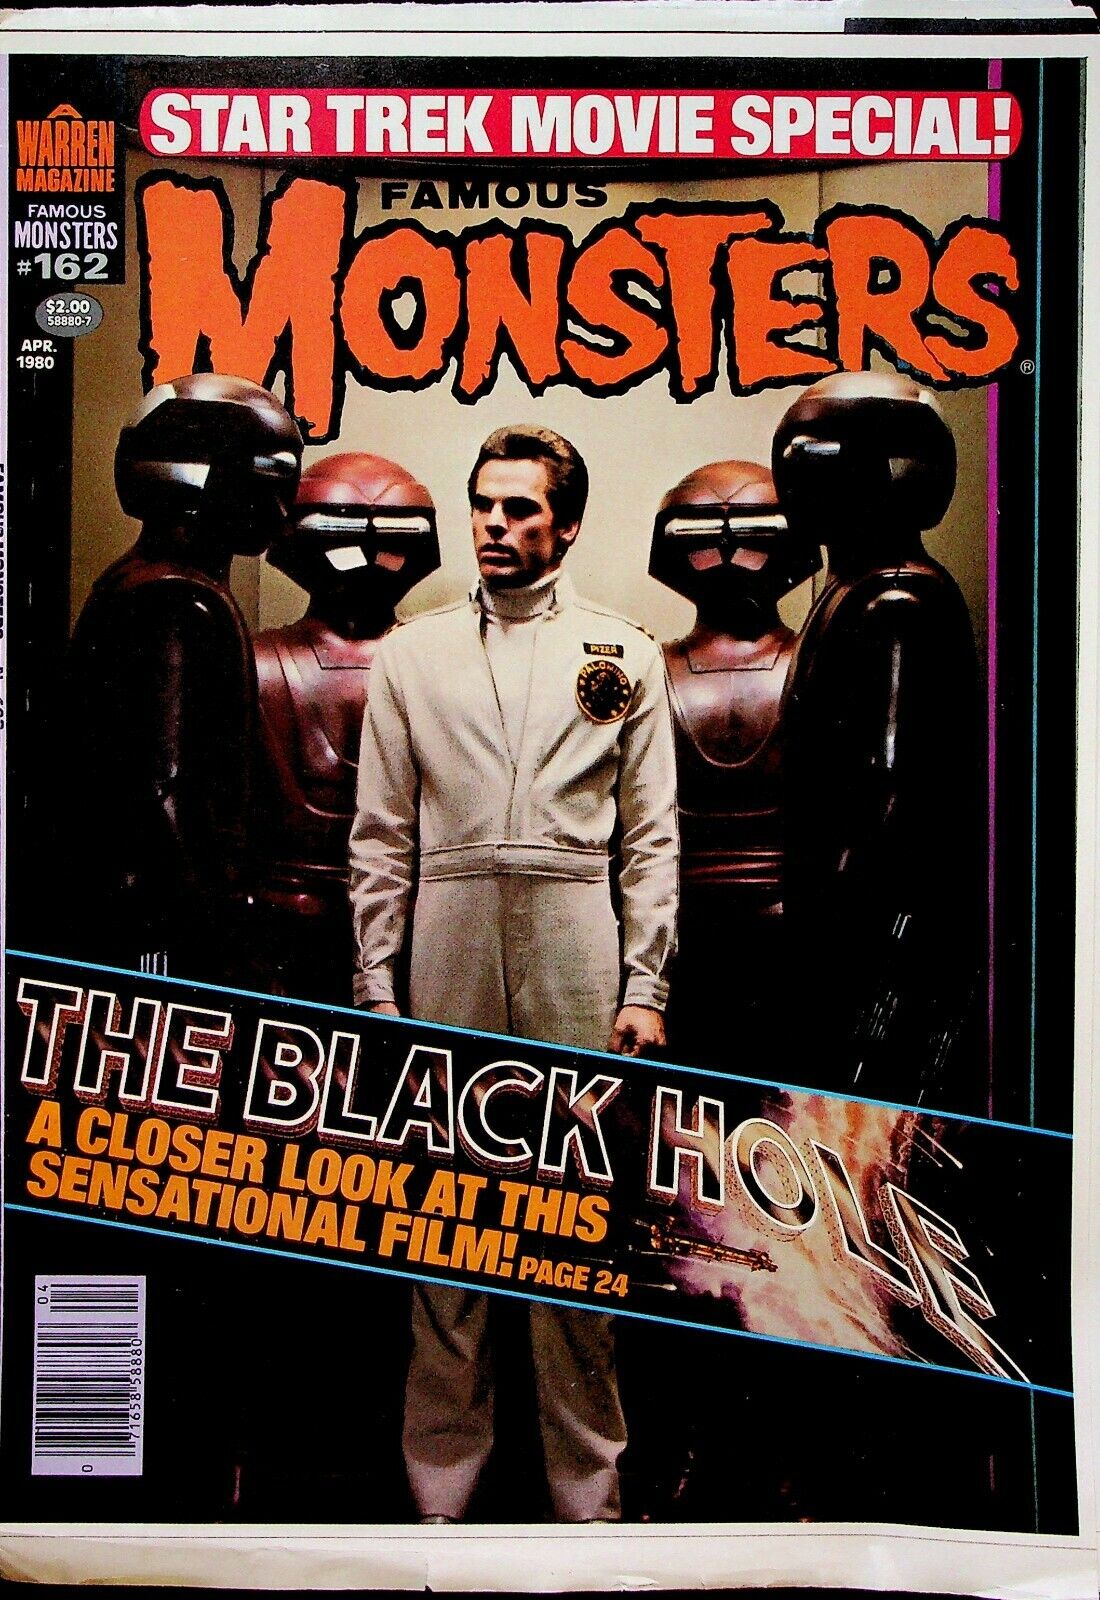 Famous Monsters of Filmland #162 Pub Master BLACK HOLE Cover Proof APR 1980 #WA